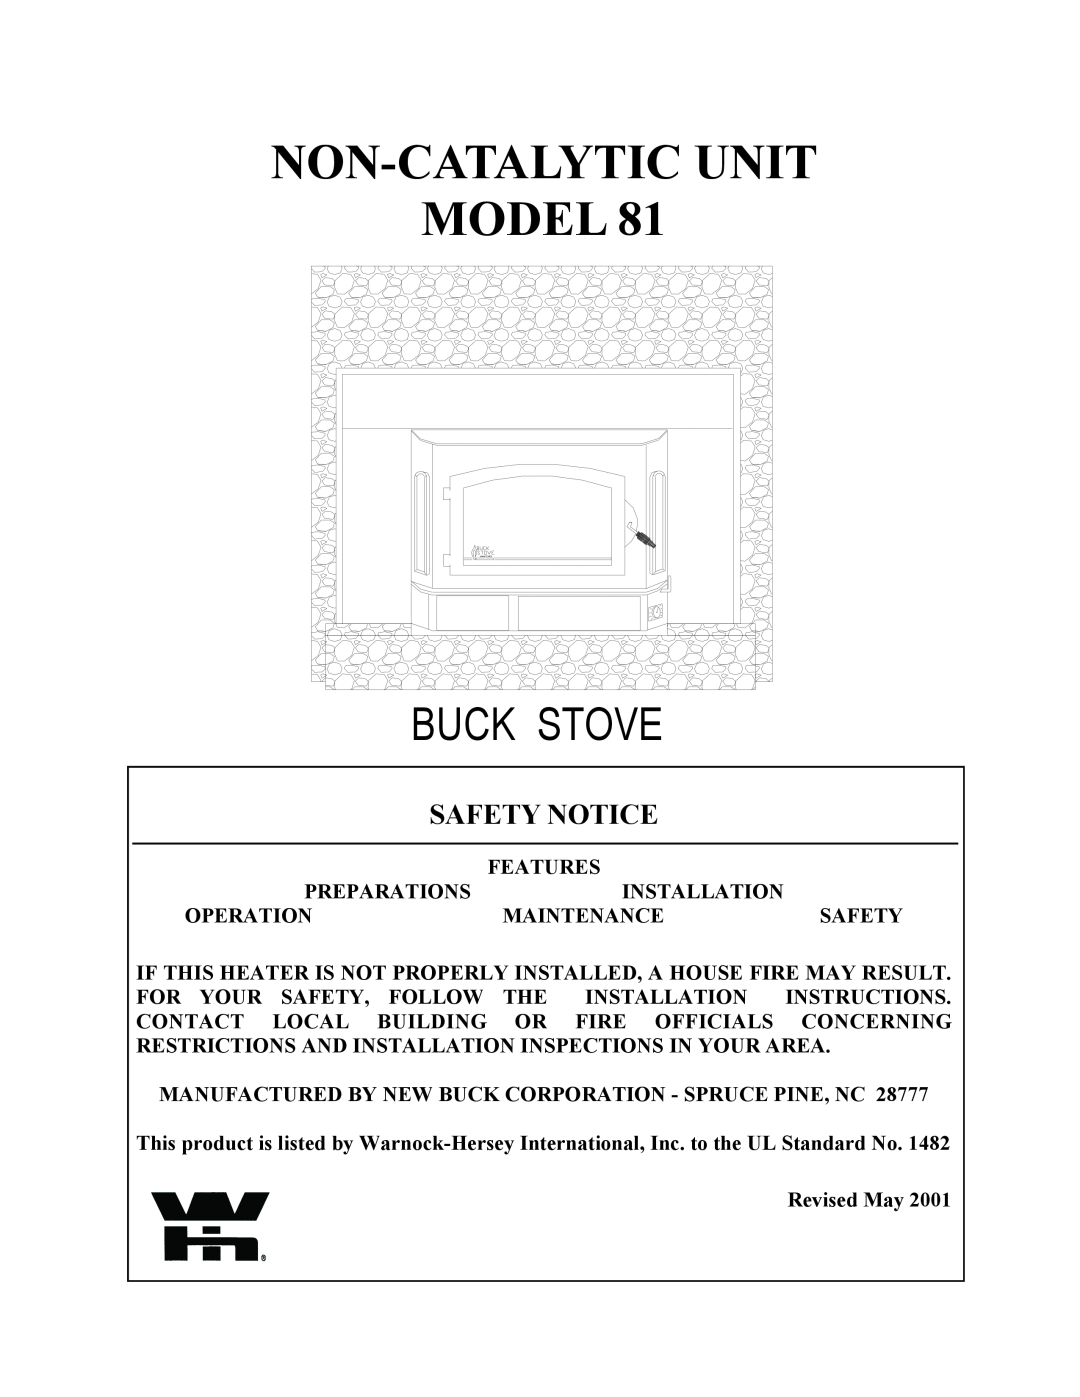 New Buck Corporation 81 installation instructions Non-Catalyticunit Model, Buck Stove 